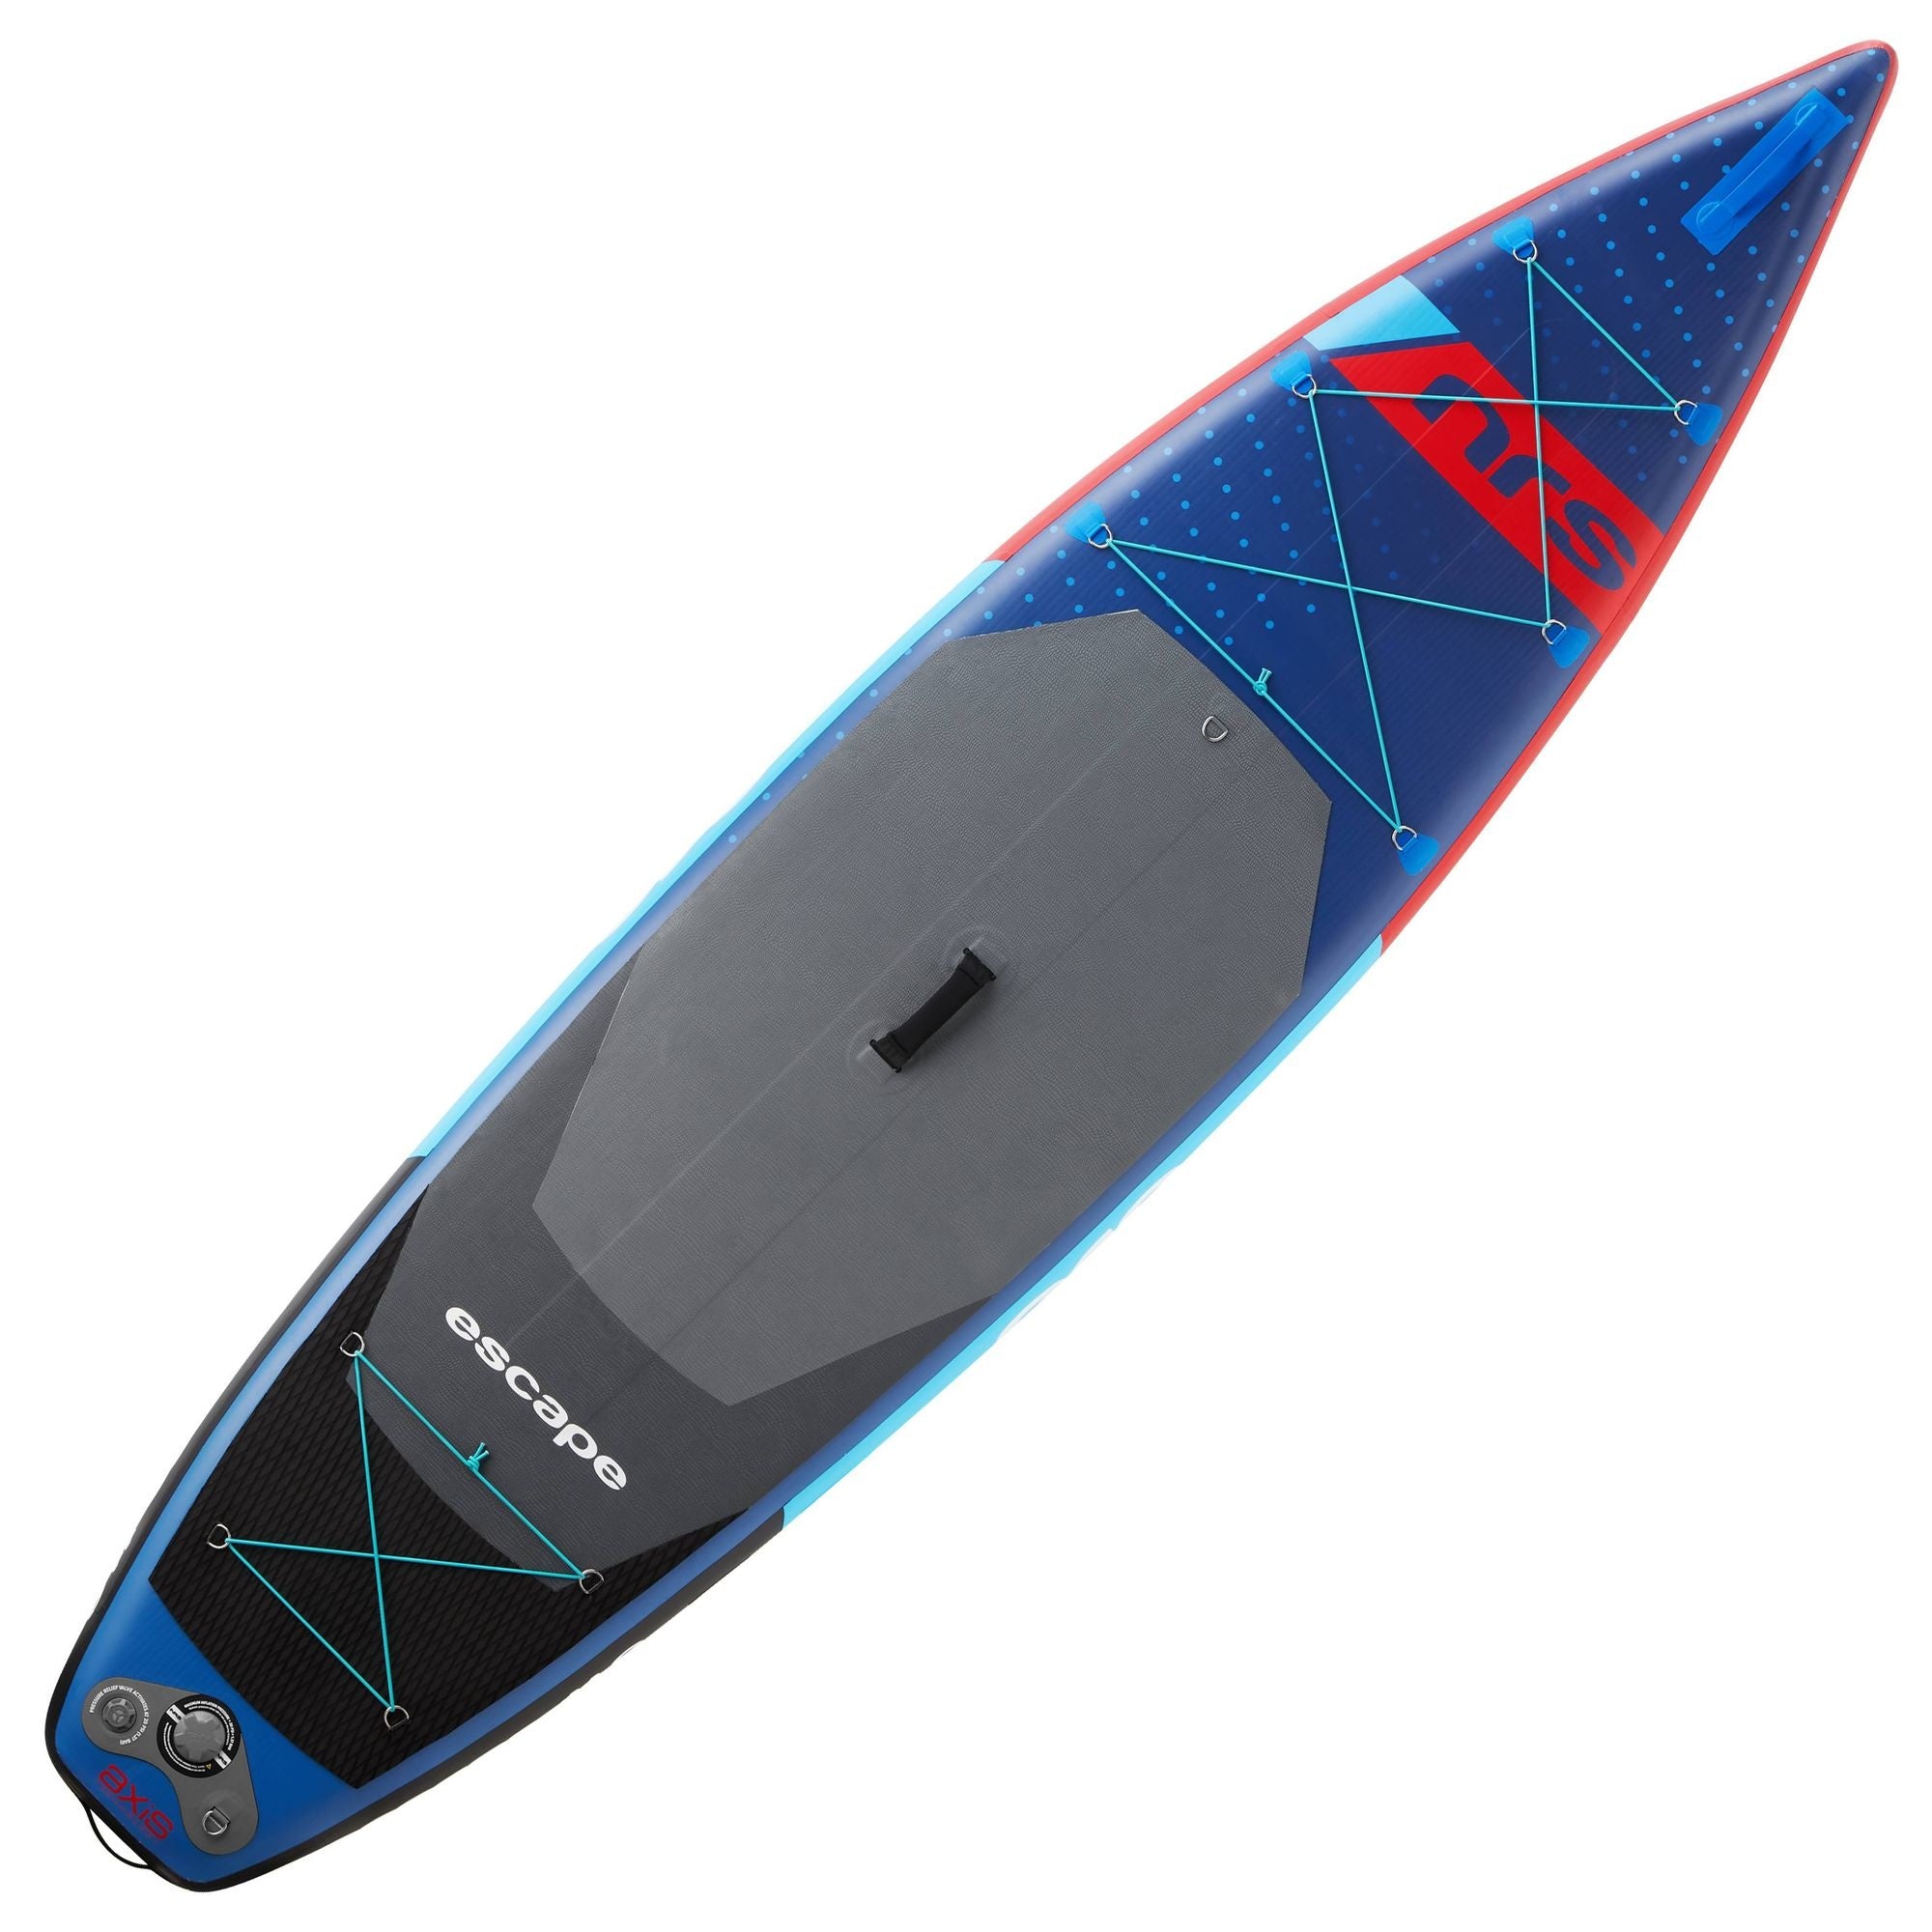 NRS - Escape Inflatable SUP